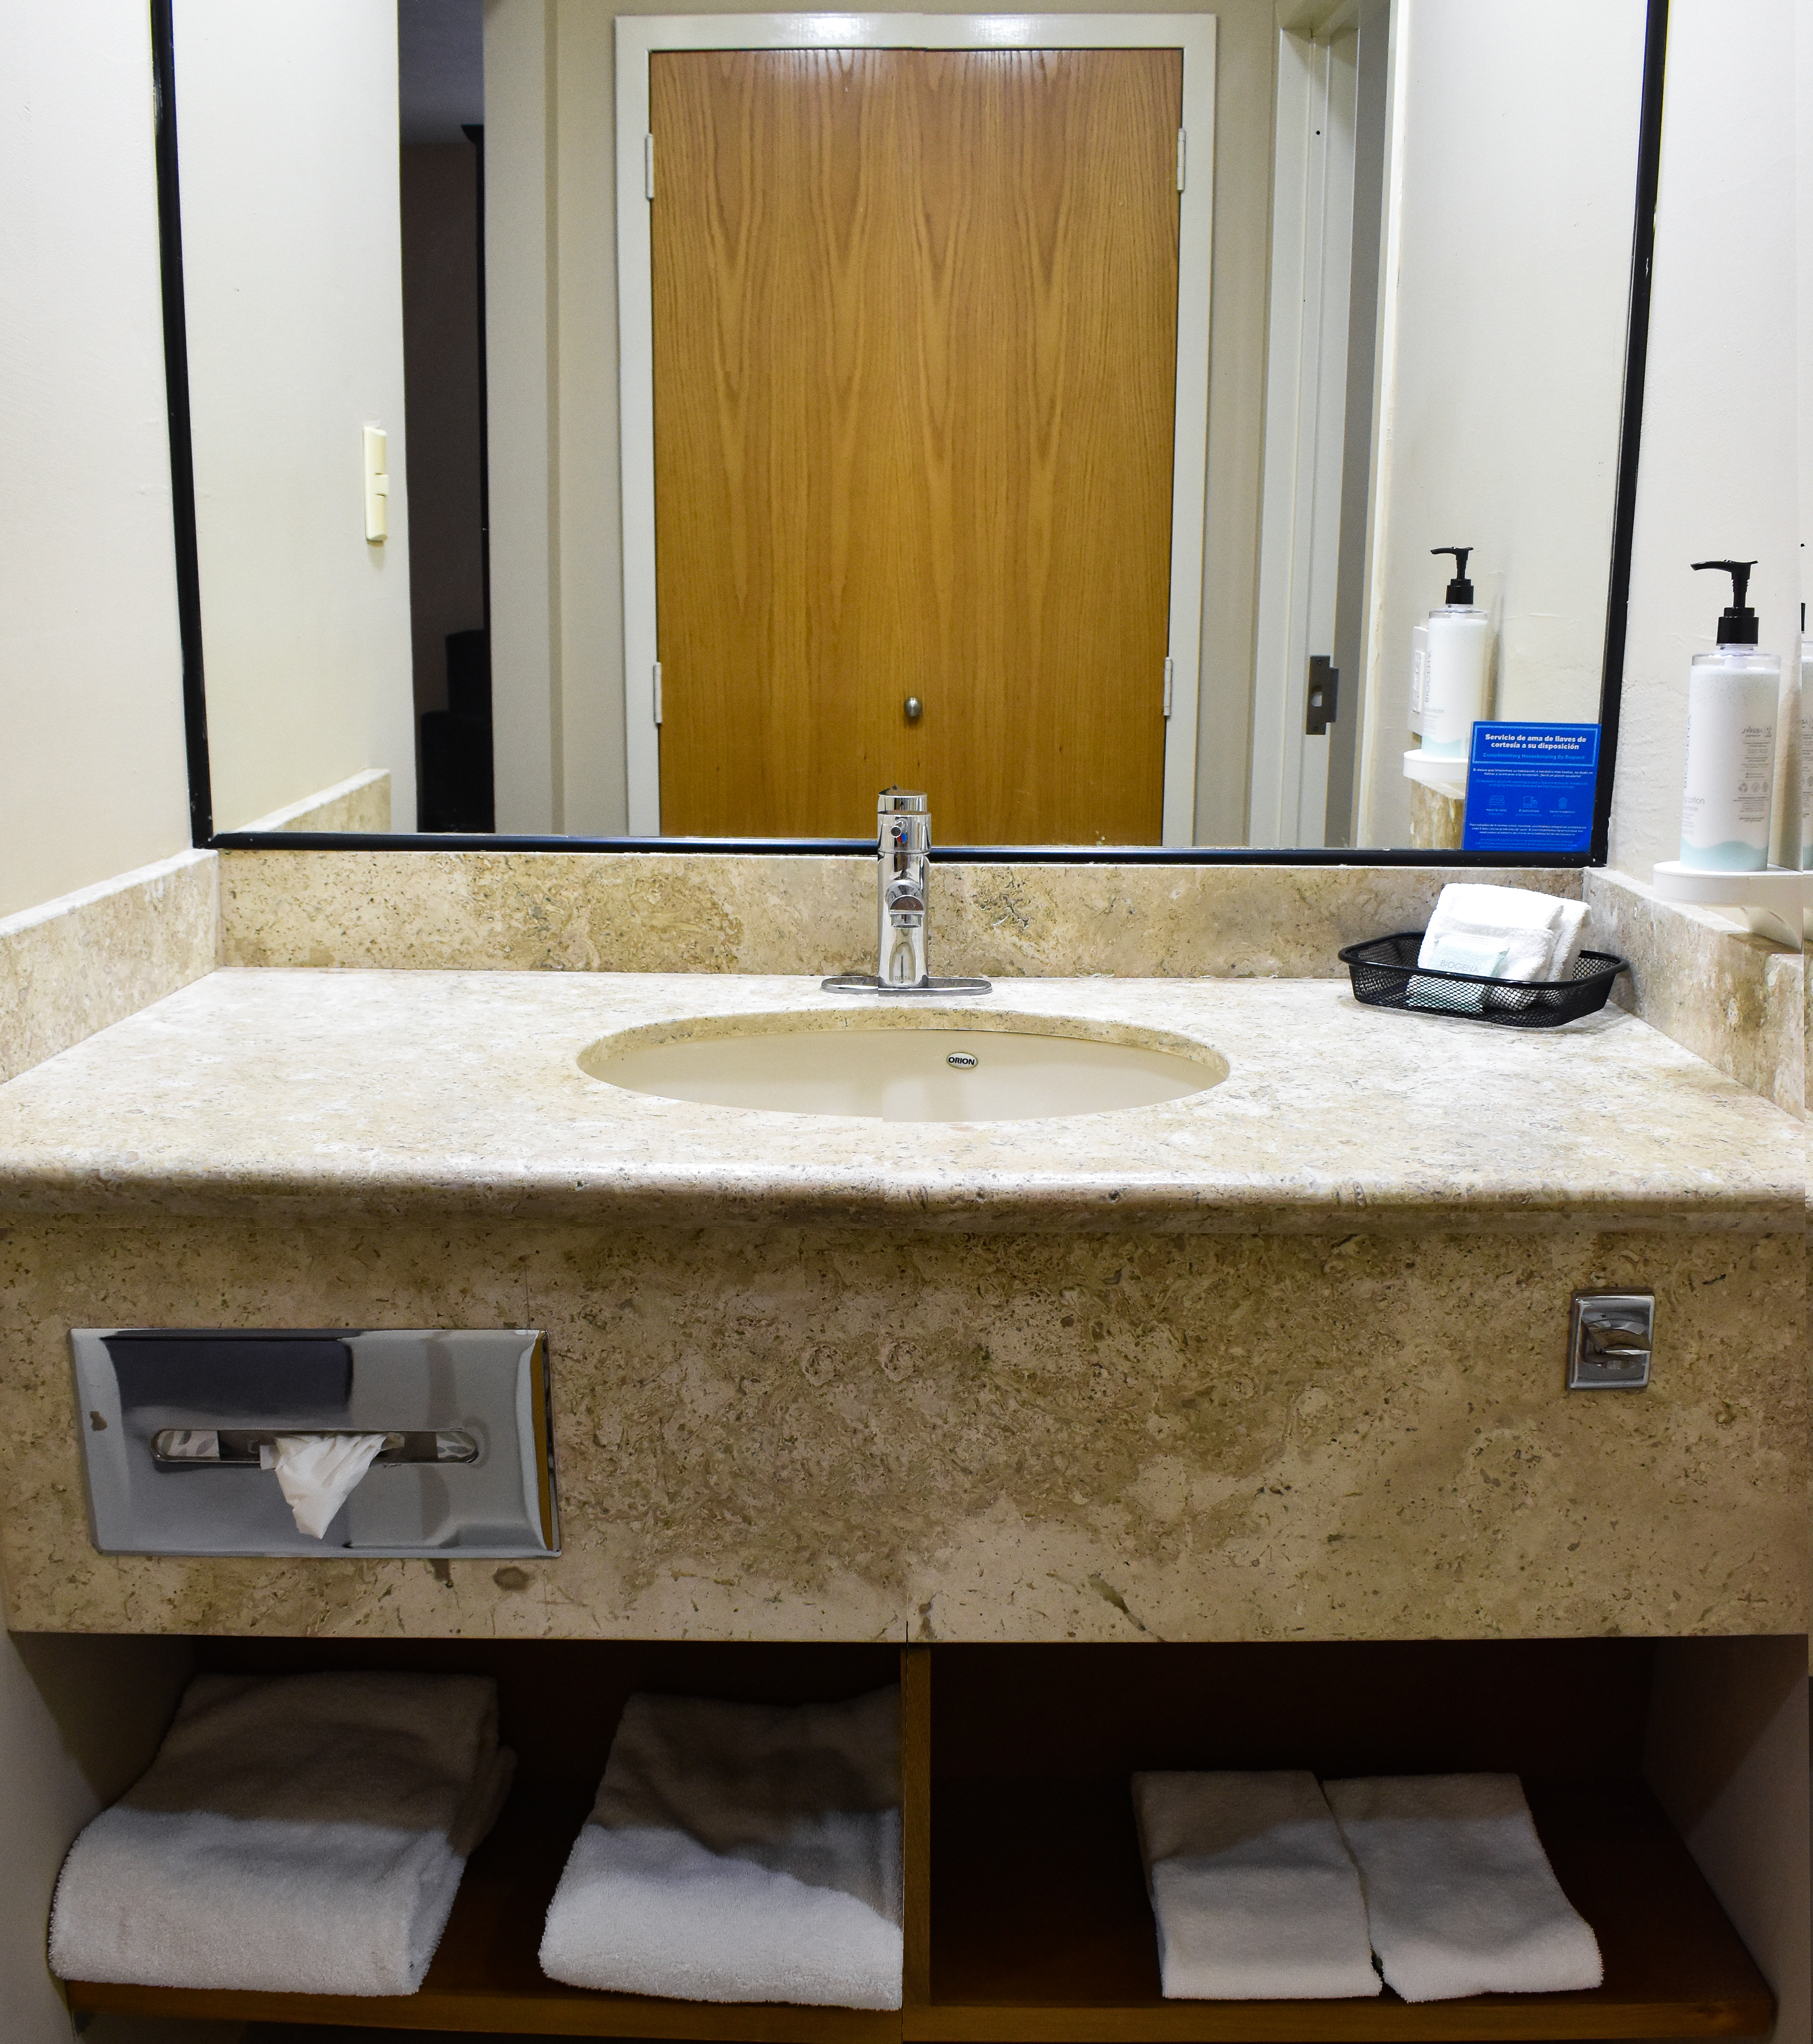 Bathroom Vanity Area with Amenities and a Large Mirror